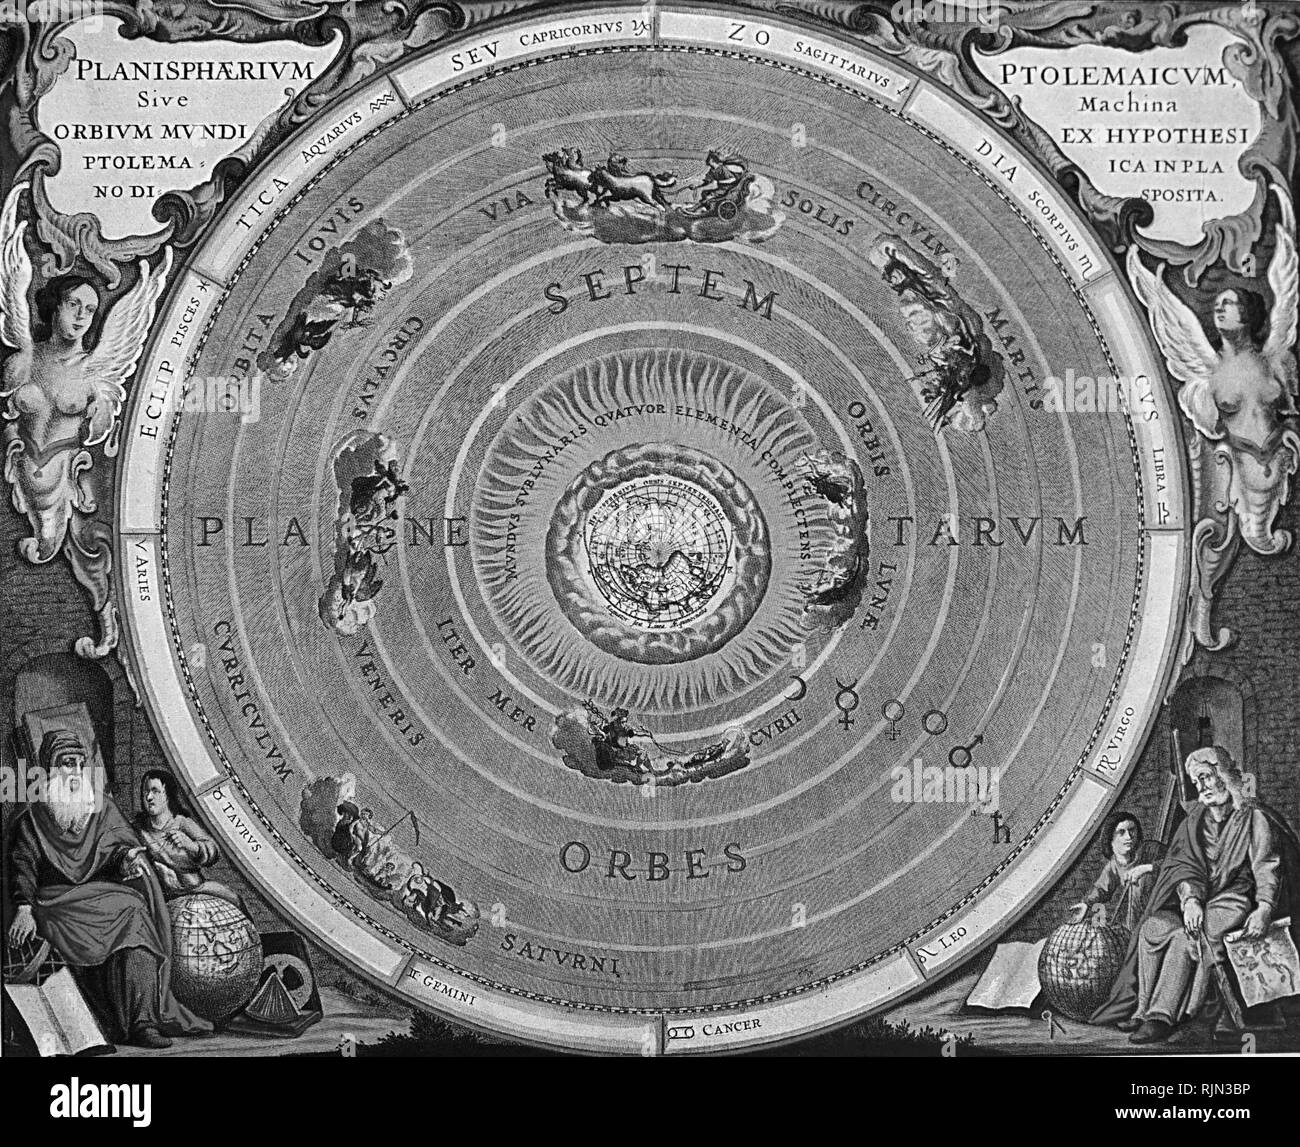 Illustration showing the astronomical predictions of Ptolemy's geocentric astronomical model were used to prepare astrological and astronomical charts for over 1500 years. The geocentric model held sway into the early modern age, but from the late 16th century onward, it was gradually superseded by the heliocentric model of Copernicus, Galileo, and Kepler. Stock Photo